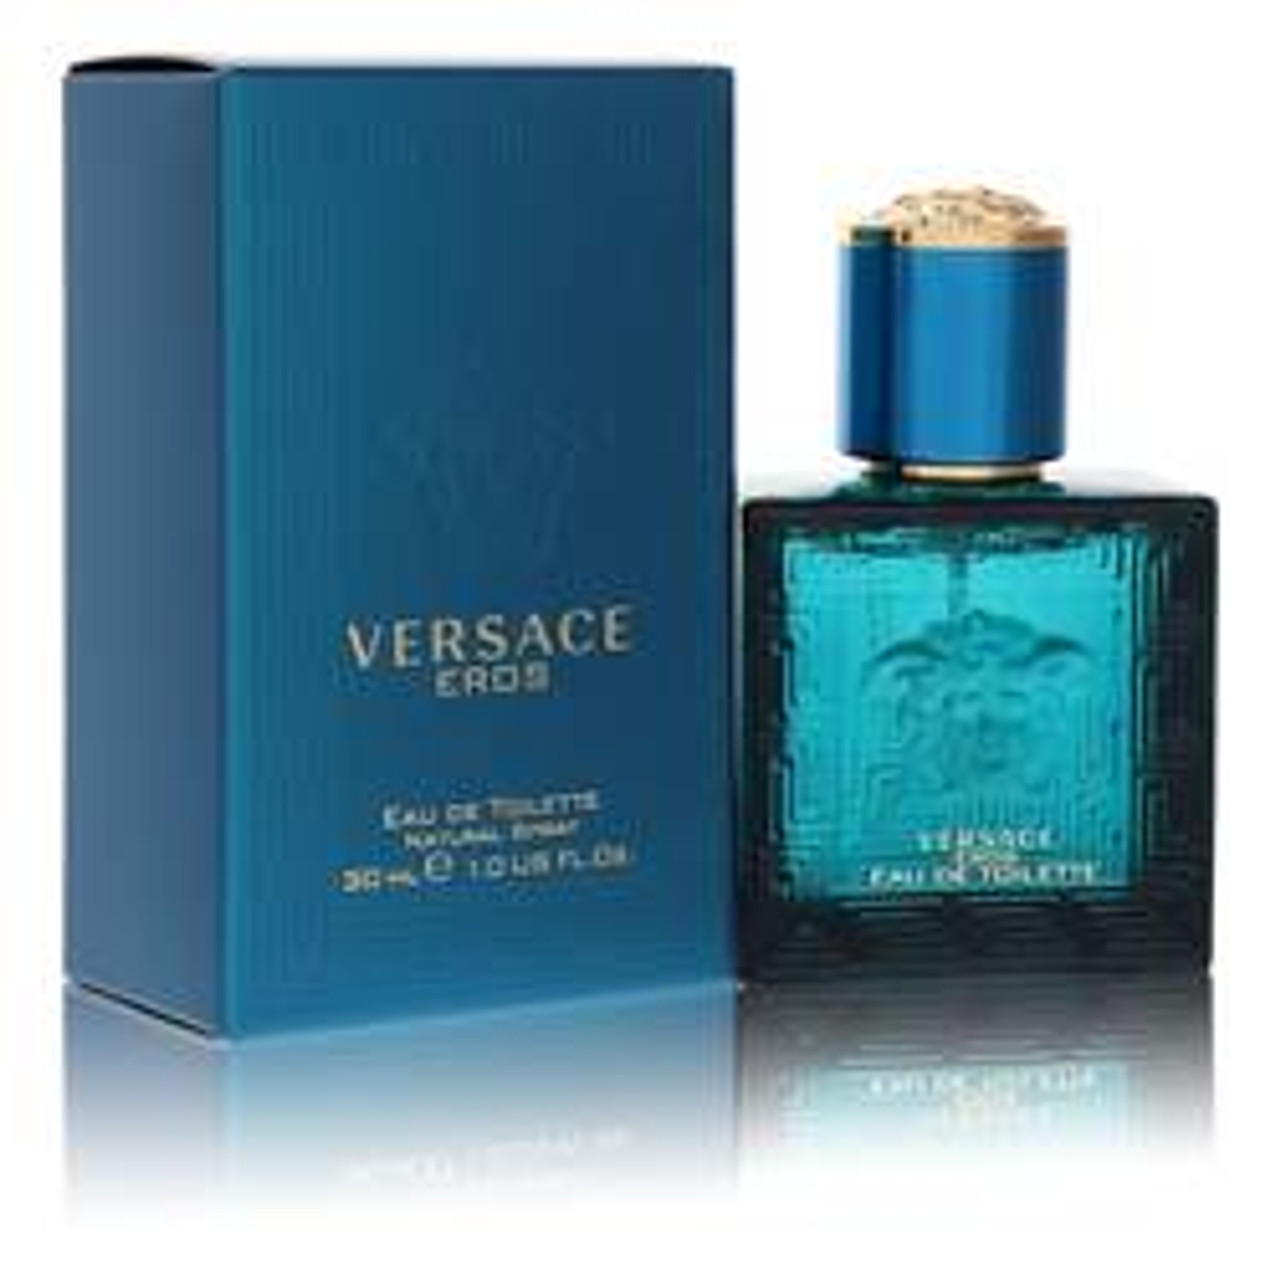 Versace Eros Cologne By Versace Eau De Toilette Spray 1 oz for Men - [From 112.00 - Choose pk Qty ] - *Ships from Miami